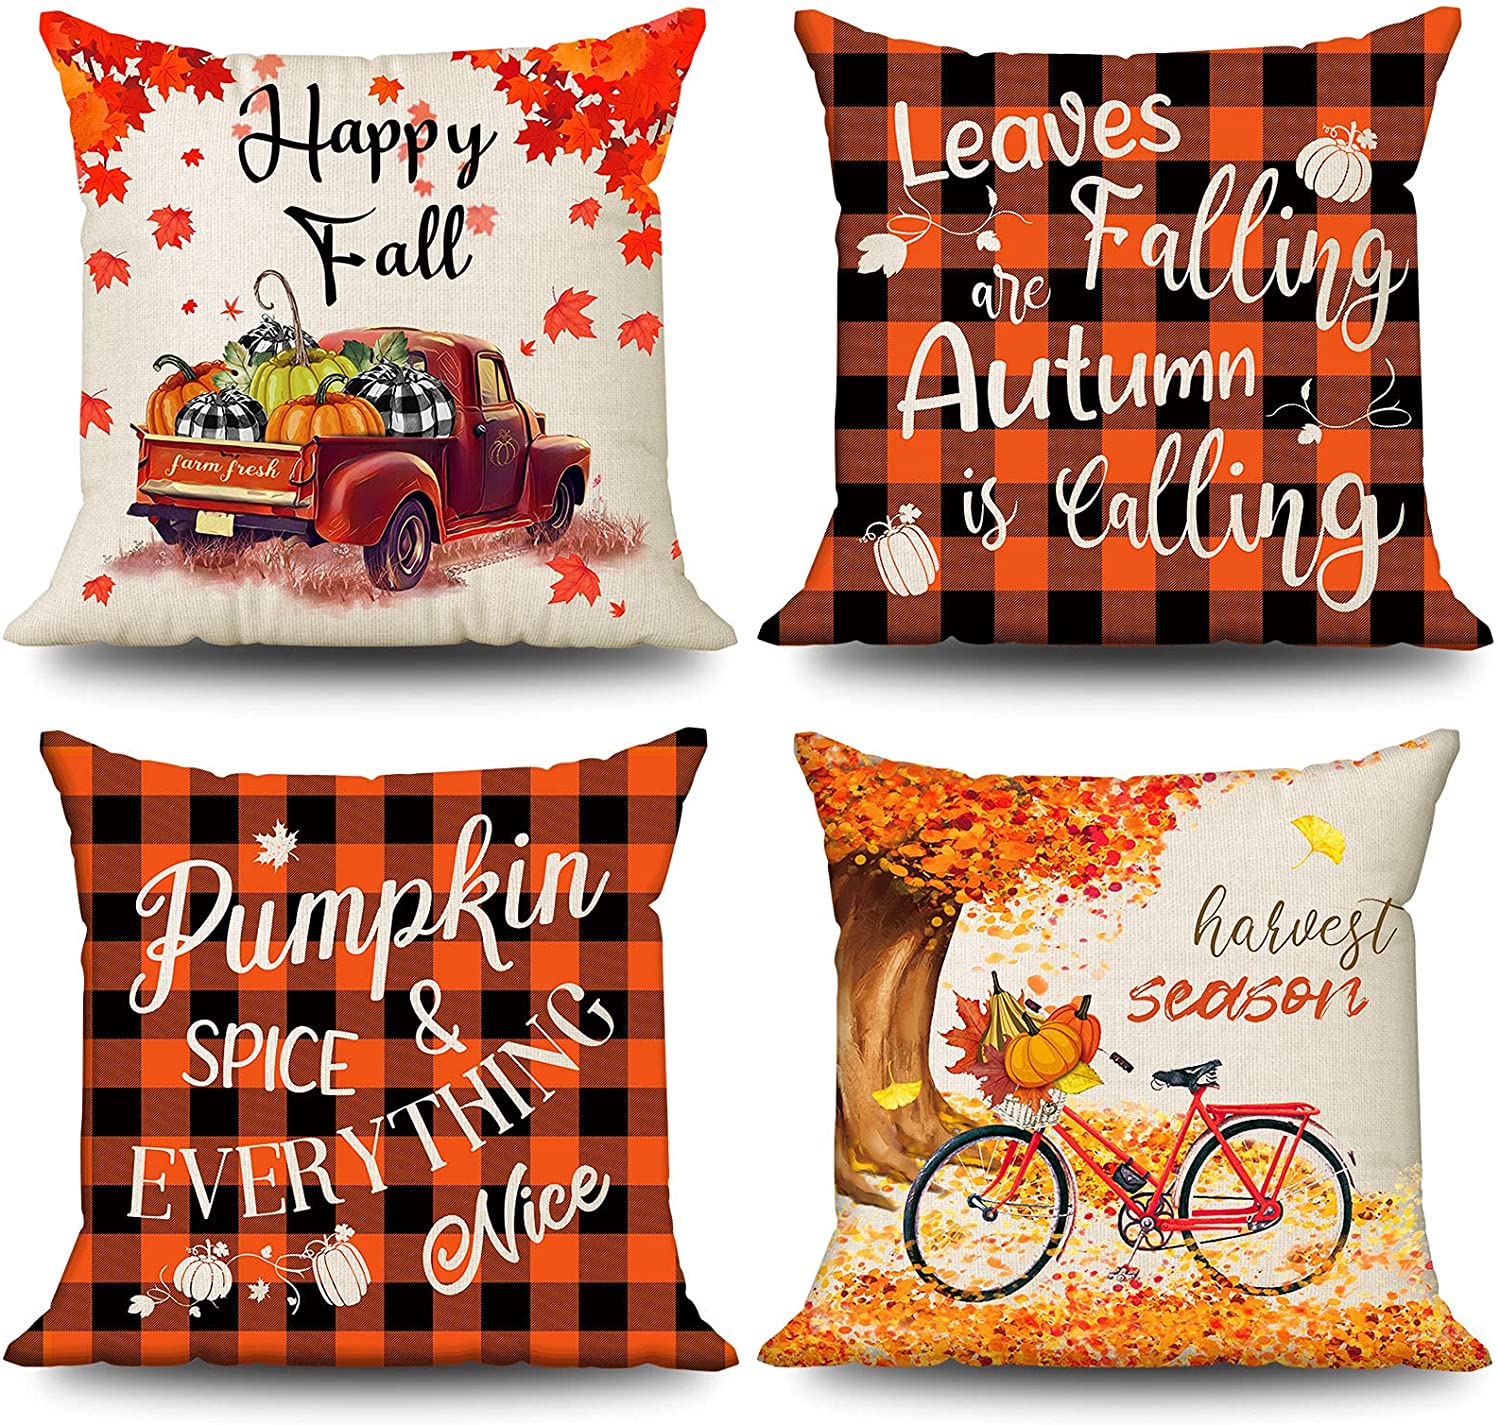 Autumn Harvest - Decorative Pillow Cover - 18x18 inches – Cotton and Crate